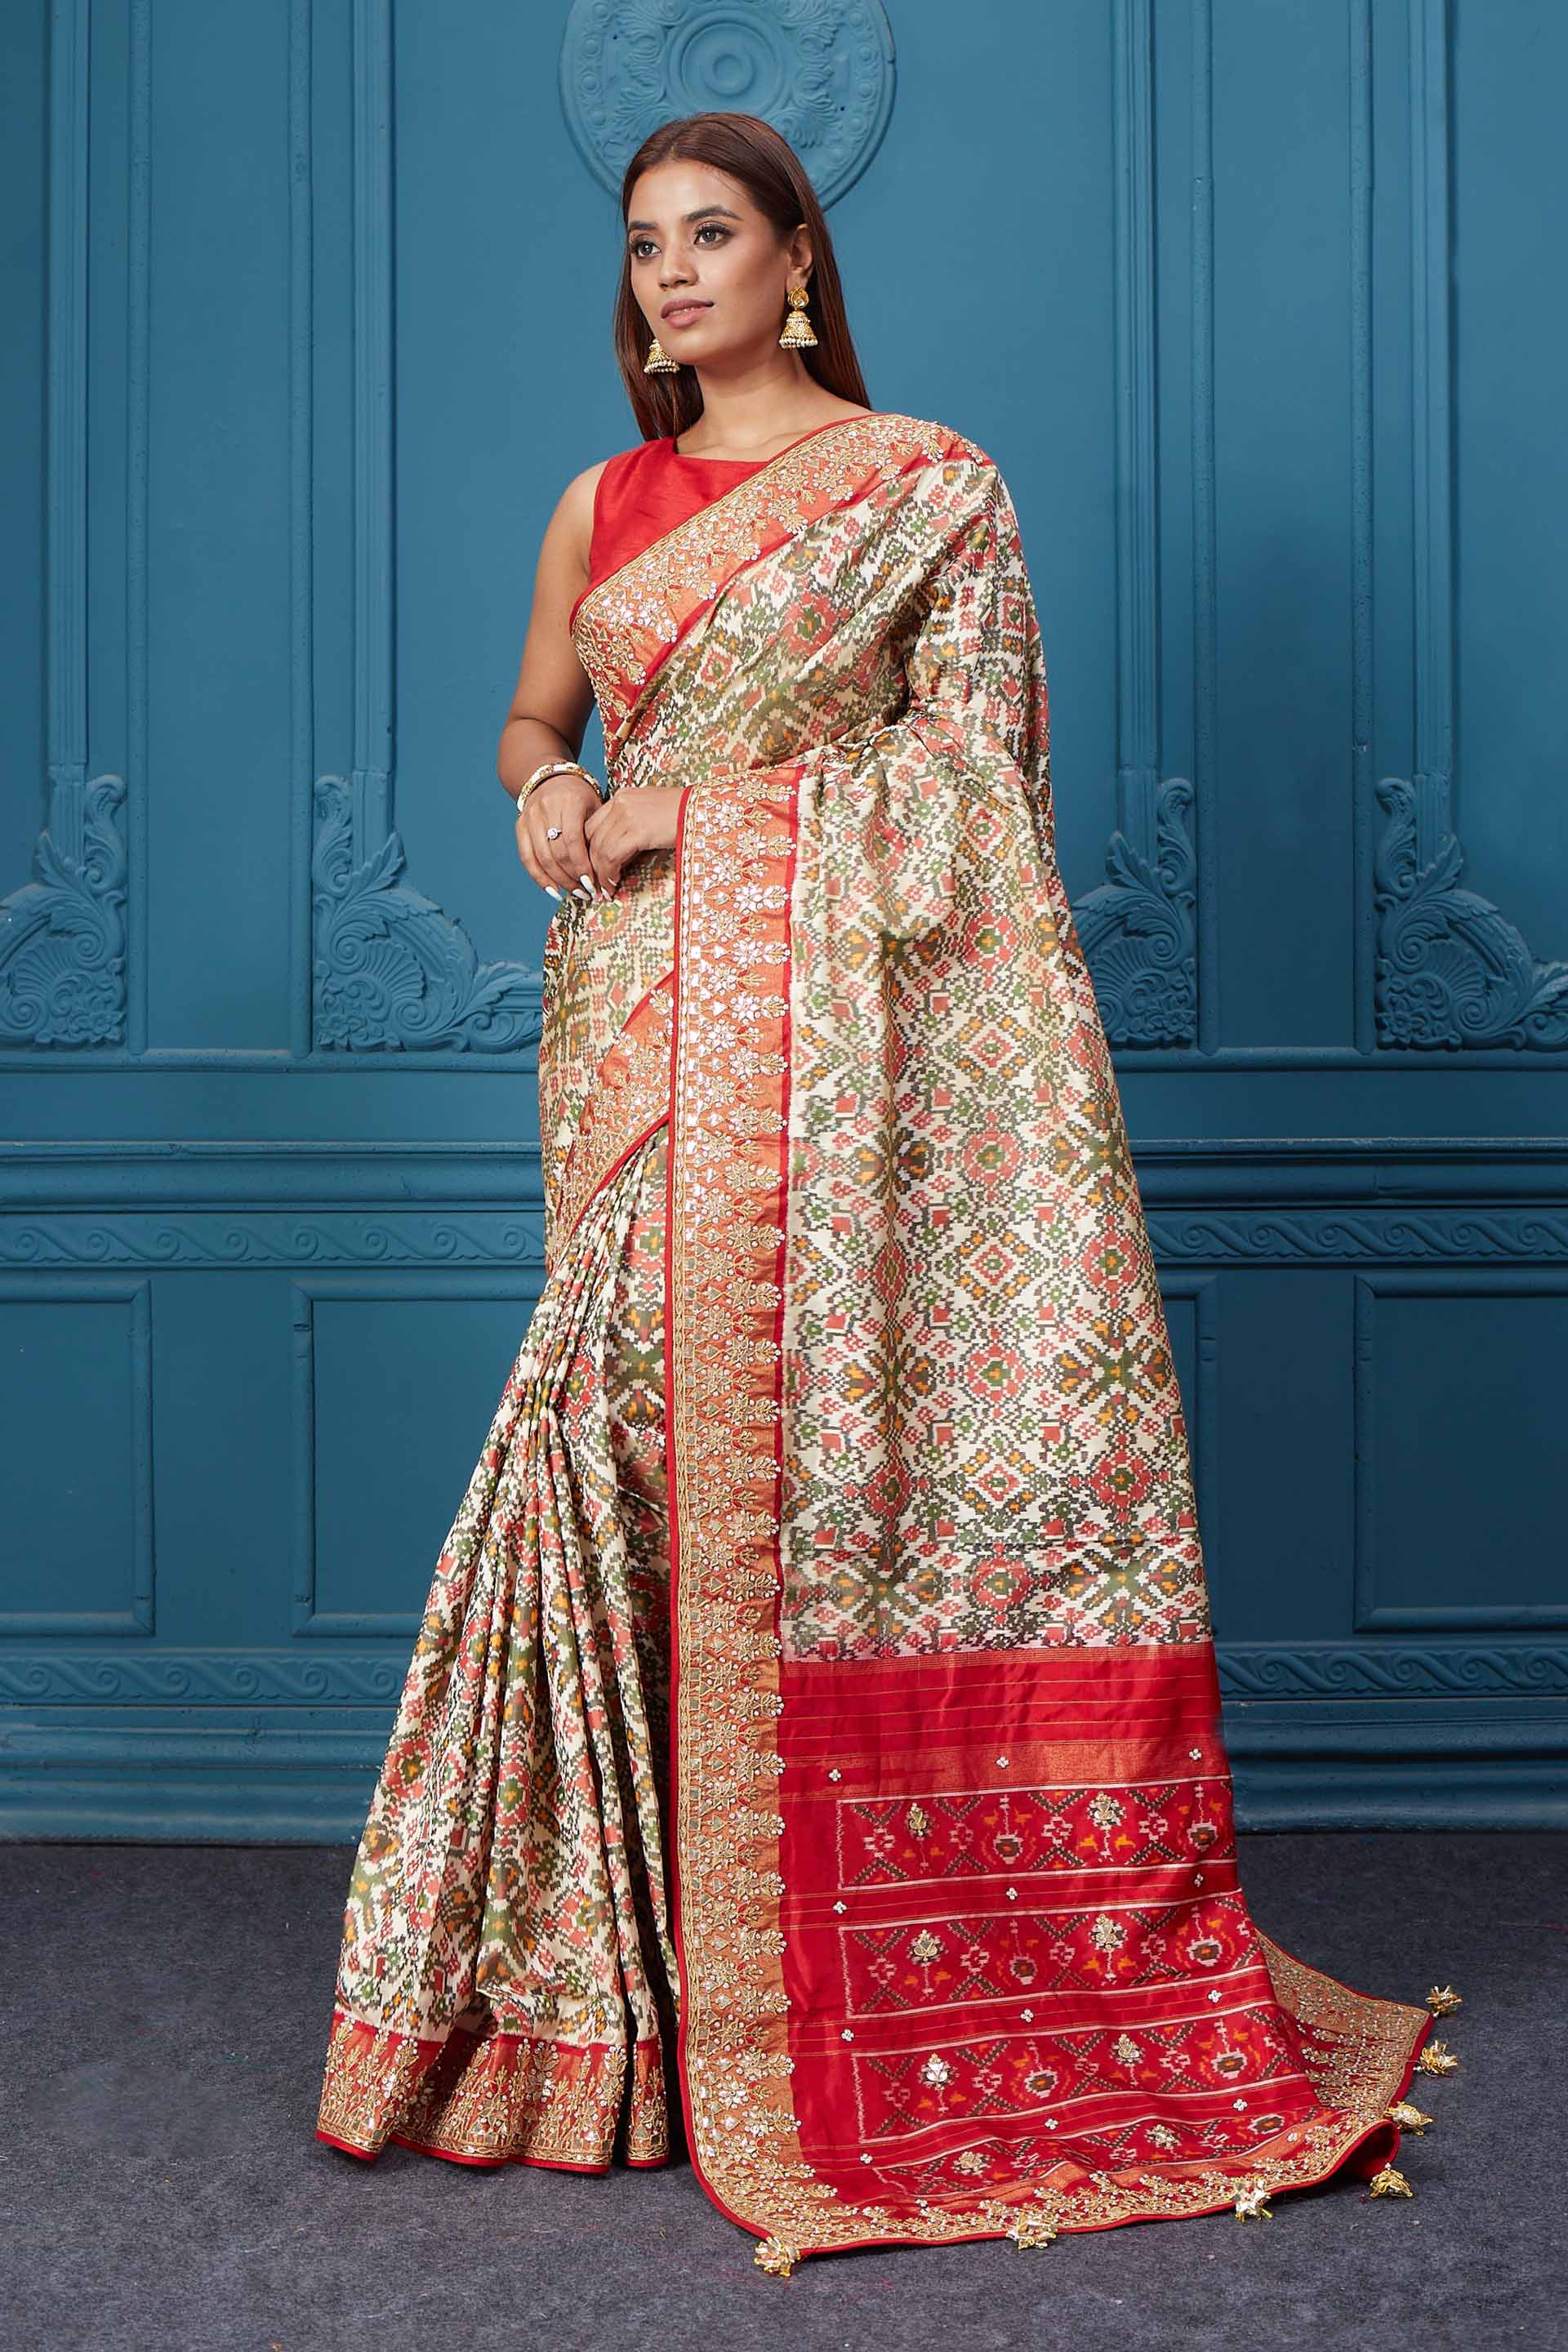 Buy off-white Patola silk saree online in USA with red embroidered border and saree blouse. Look royal at weddings and festive occasions in exquisite designer sarees, handwoven sarees, pure silk saris, Banarasi sarees, Kanchipuram silk sarees from Pure Elegance Indian saree store in USA. -pallu